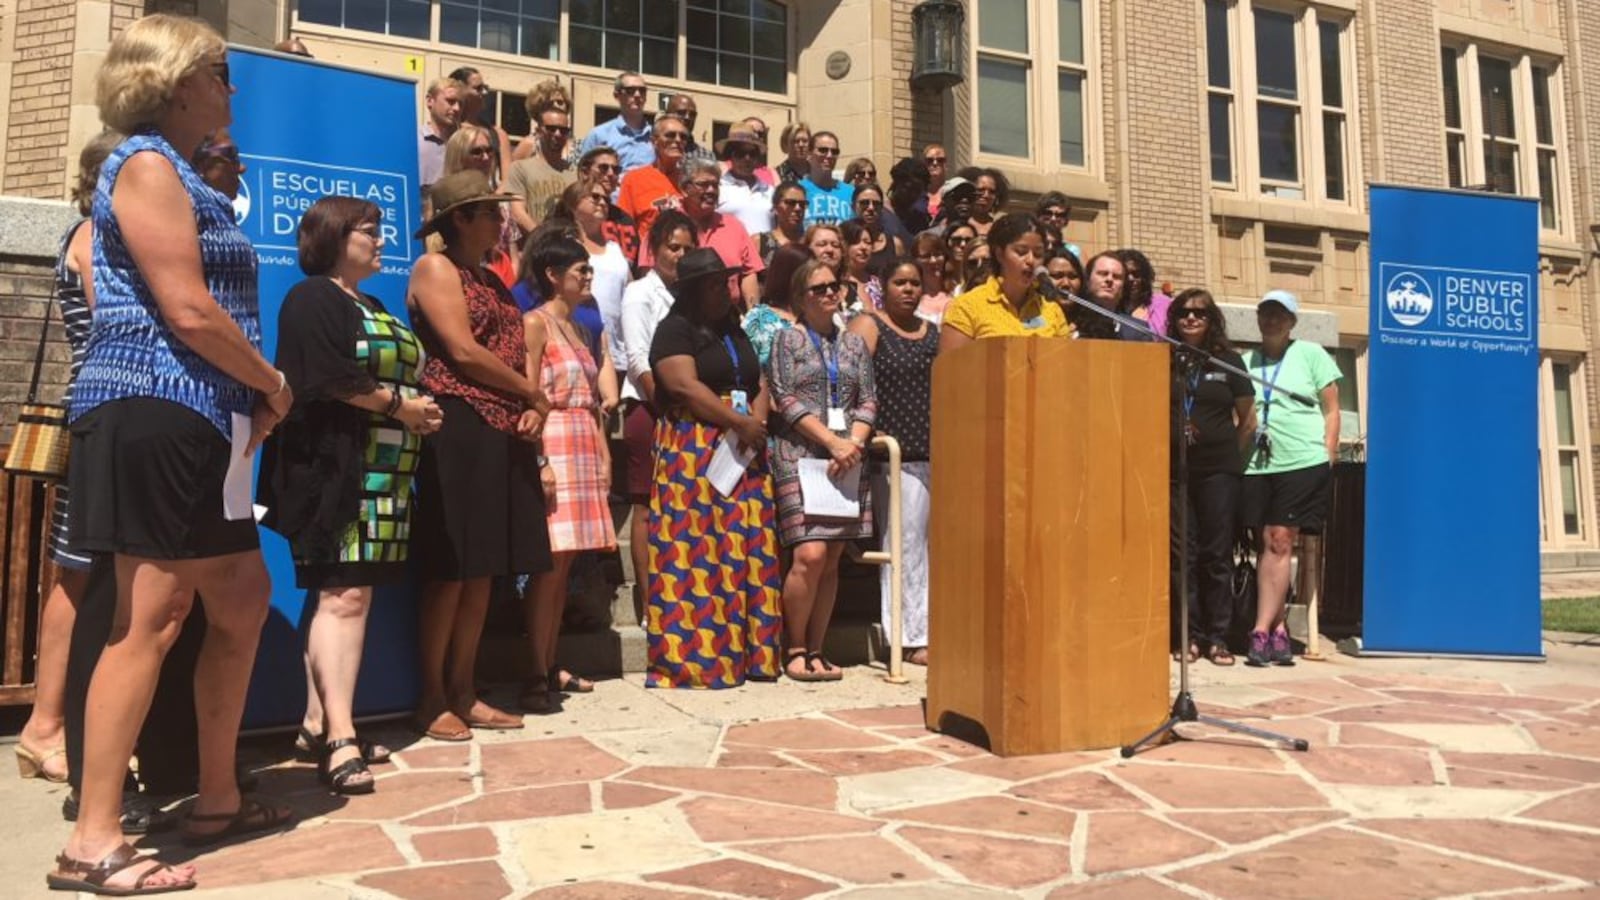 Flanked by principals and fellow board members, Angela Cobián denounces the impact of family separation on students at a press conference at West High School. (Erica Meltzer/Chalkbeat)